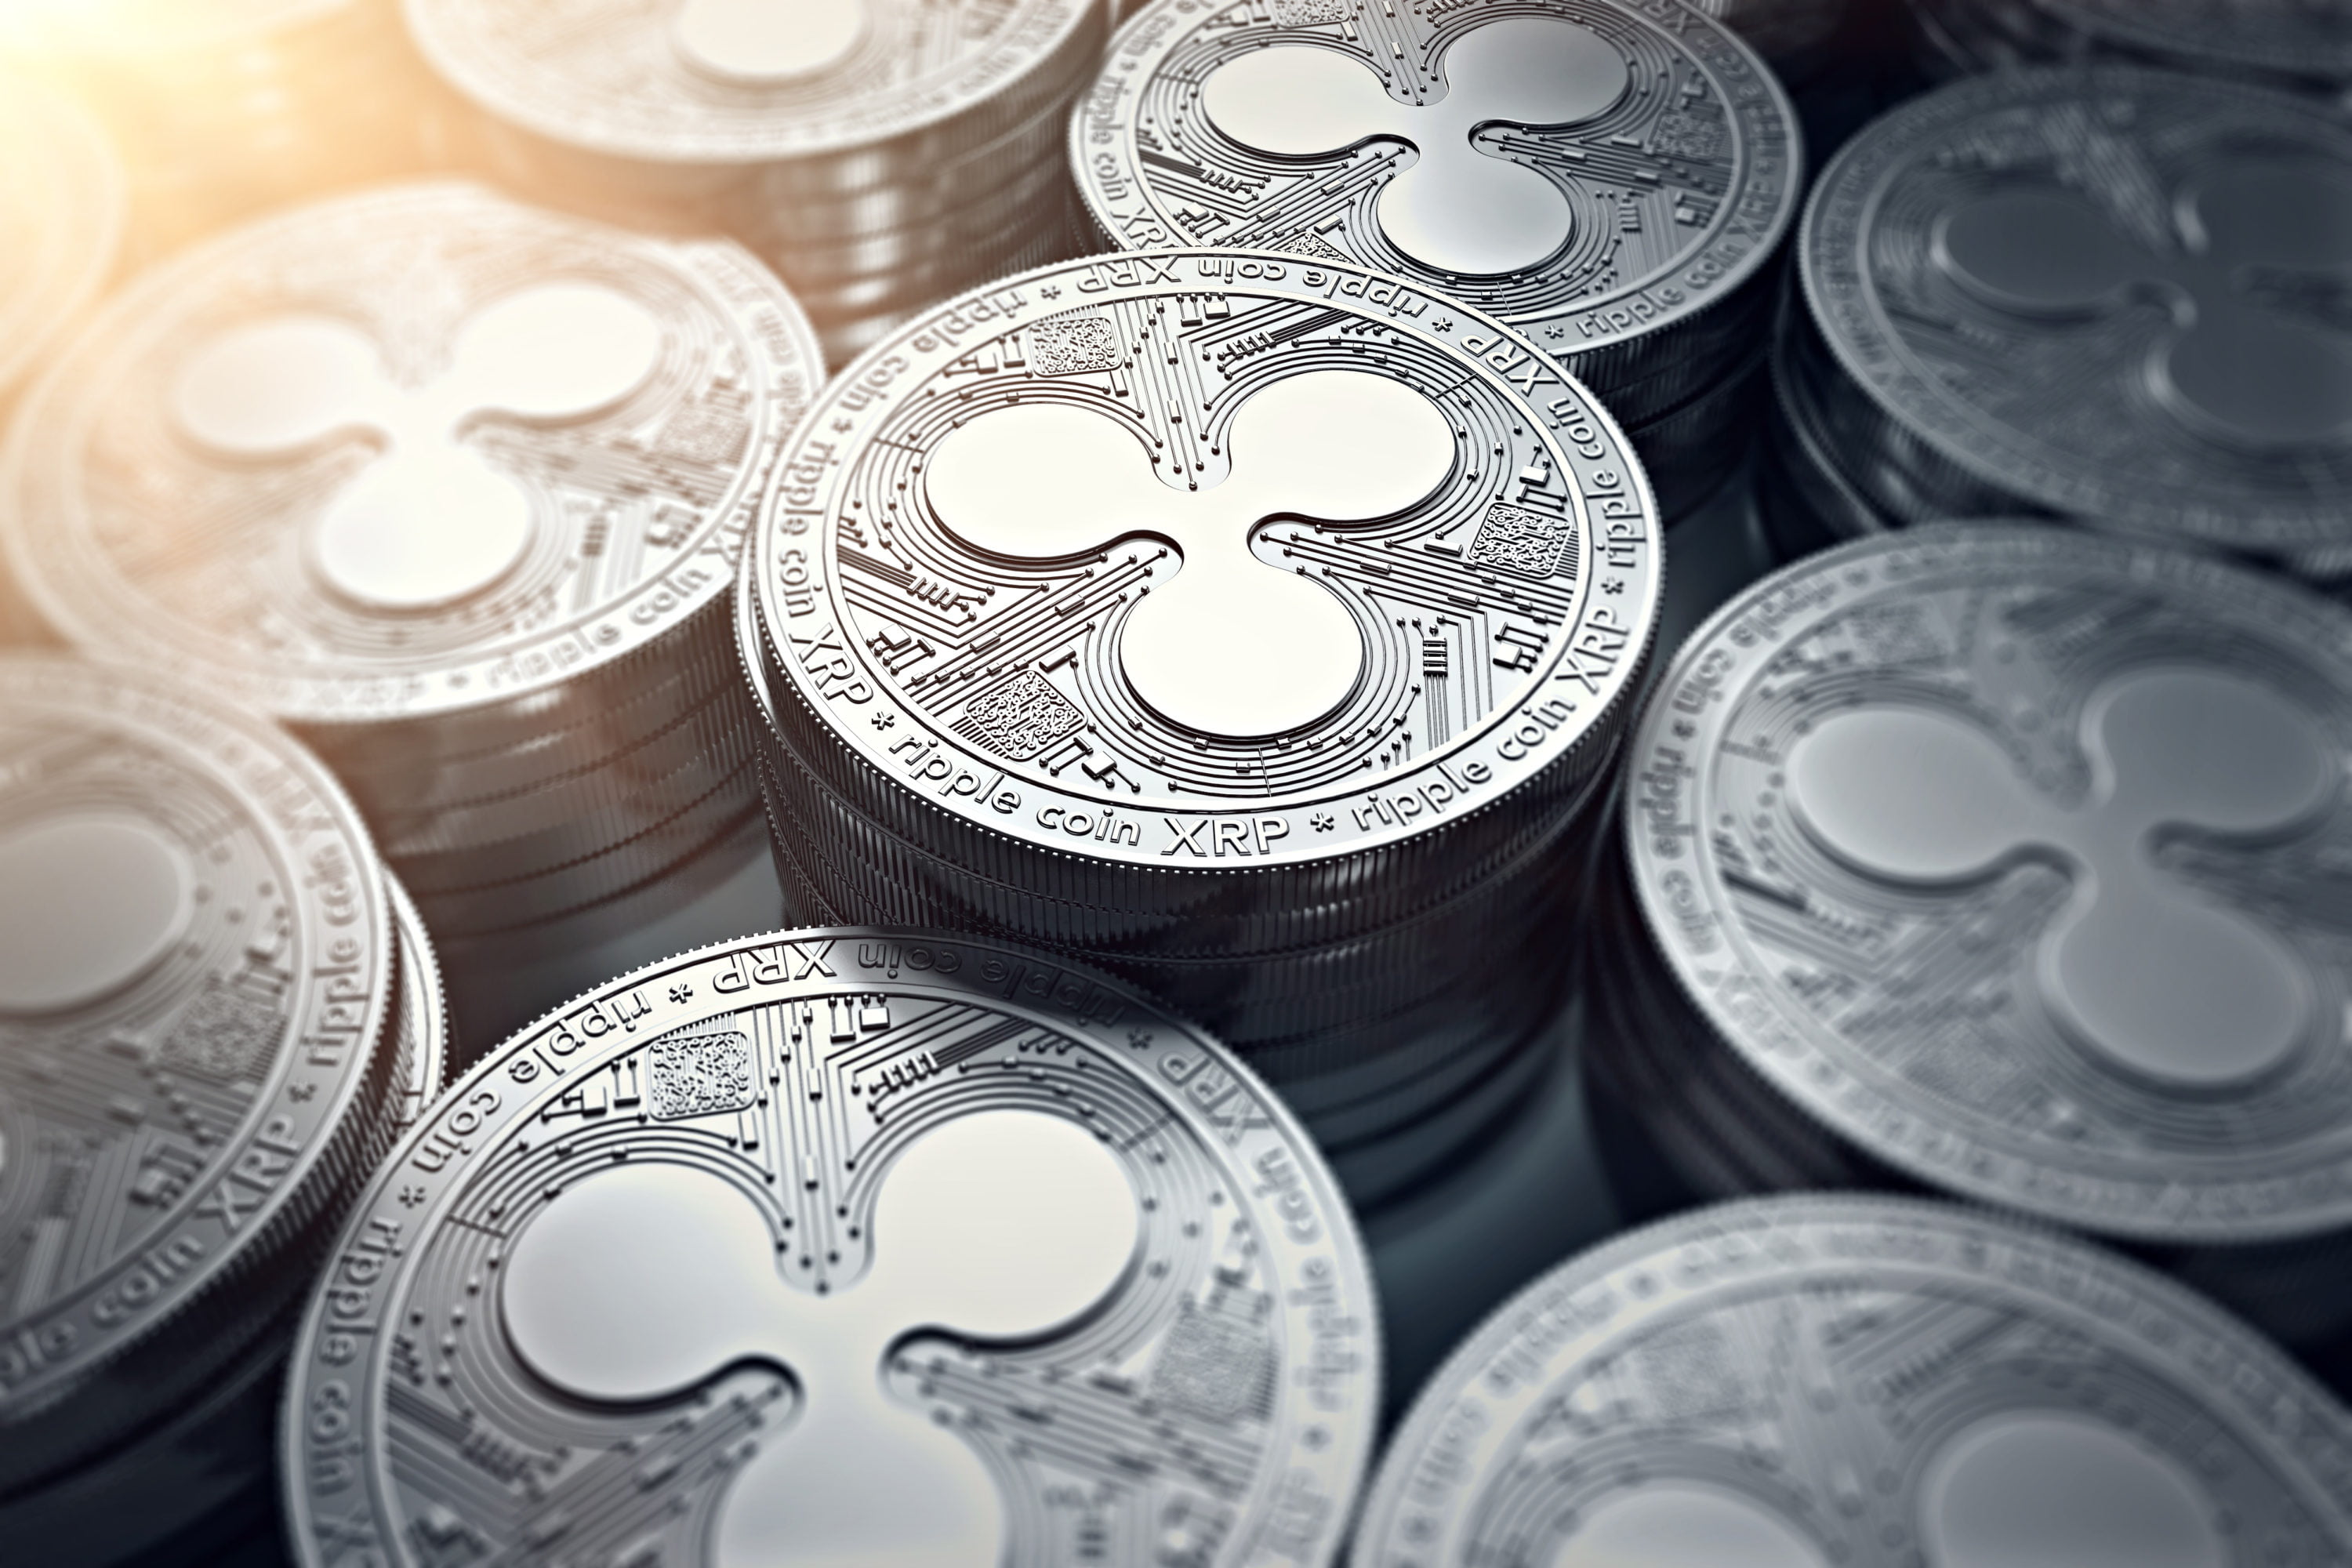 XRP Holds Strong After JP Morgan Slaps Ripple With Bank-Centric Crypto